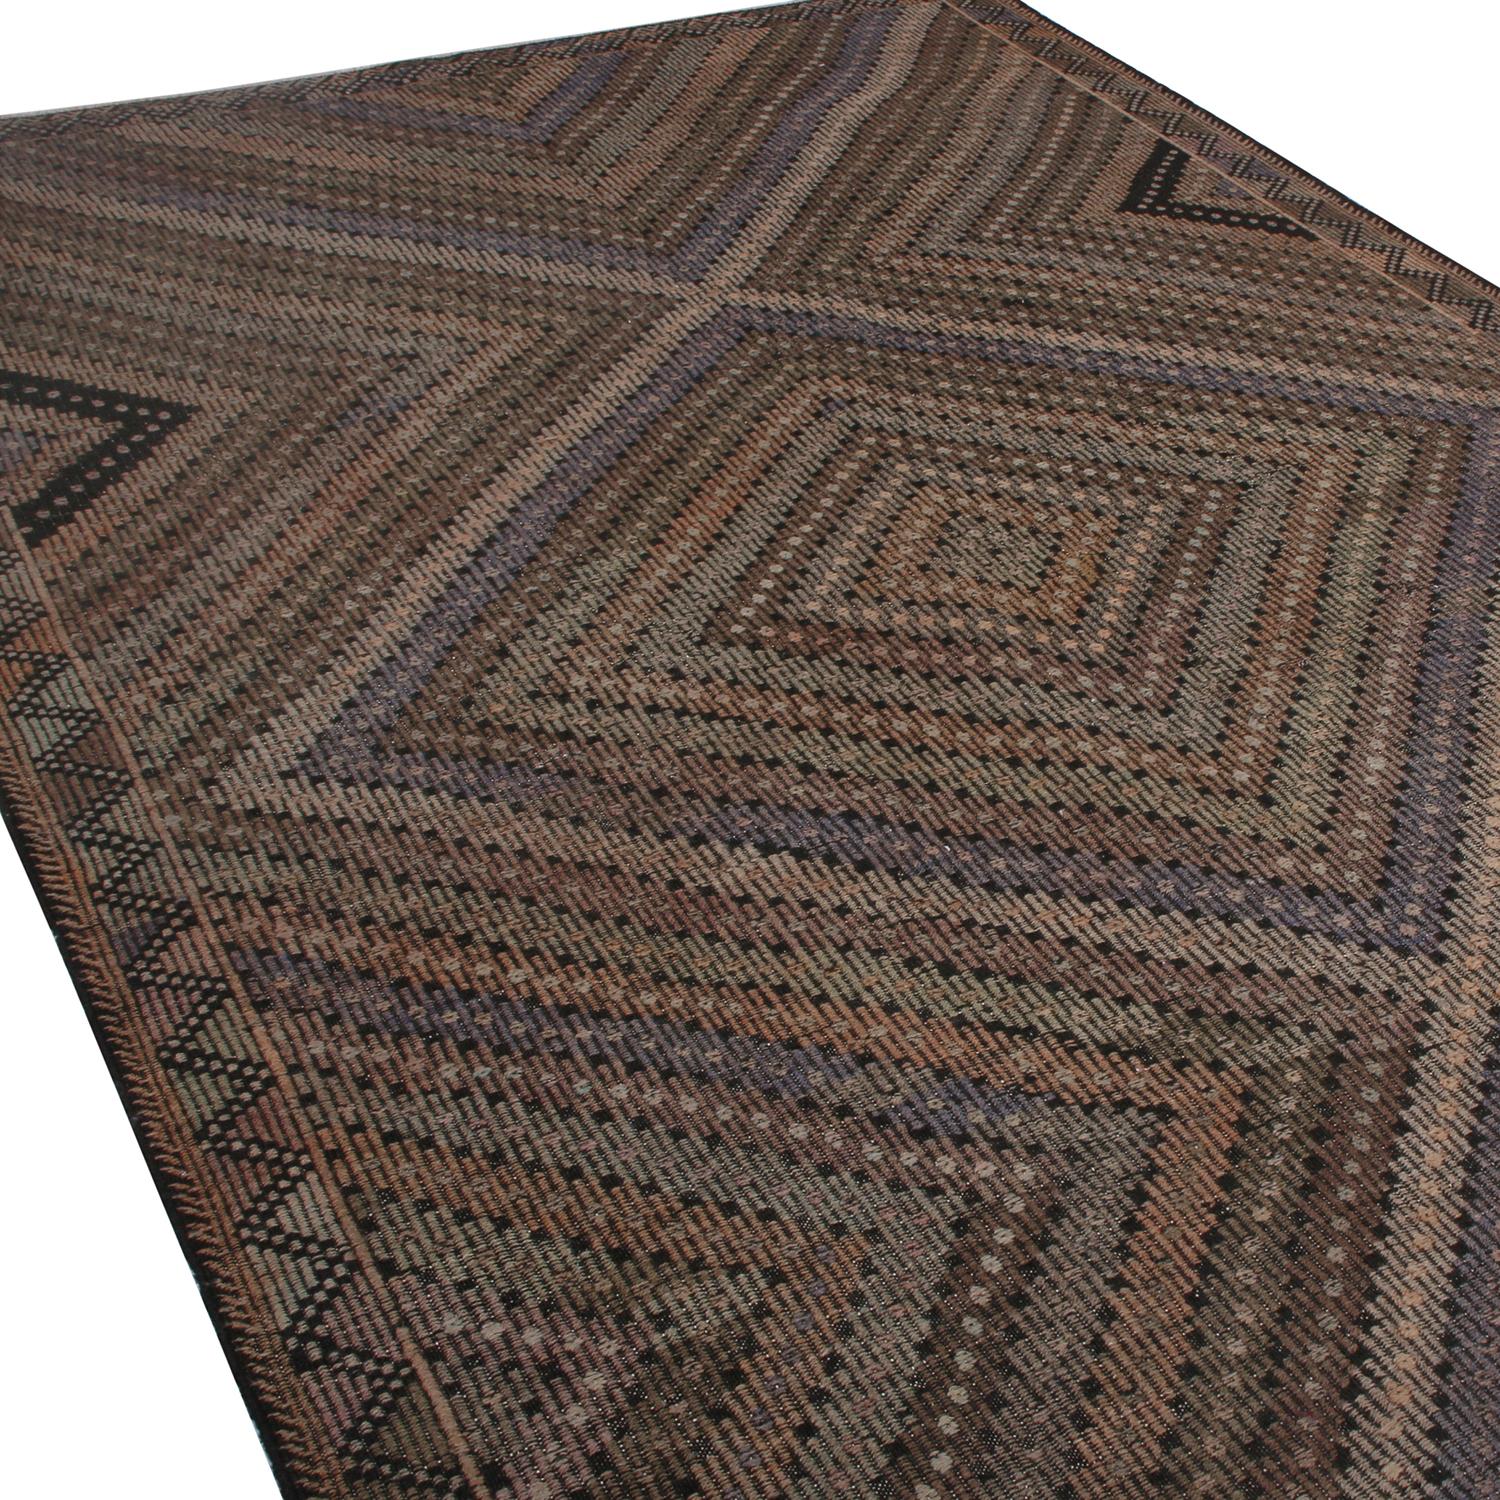 Handwoven in Turkey originating between 1950-1960, this vintage midcentury wool kilim rug enjoys a meticulous play of embroidery and flat weaving, uncommon and distinguishing of a select line from our recent additions to our collections. The